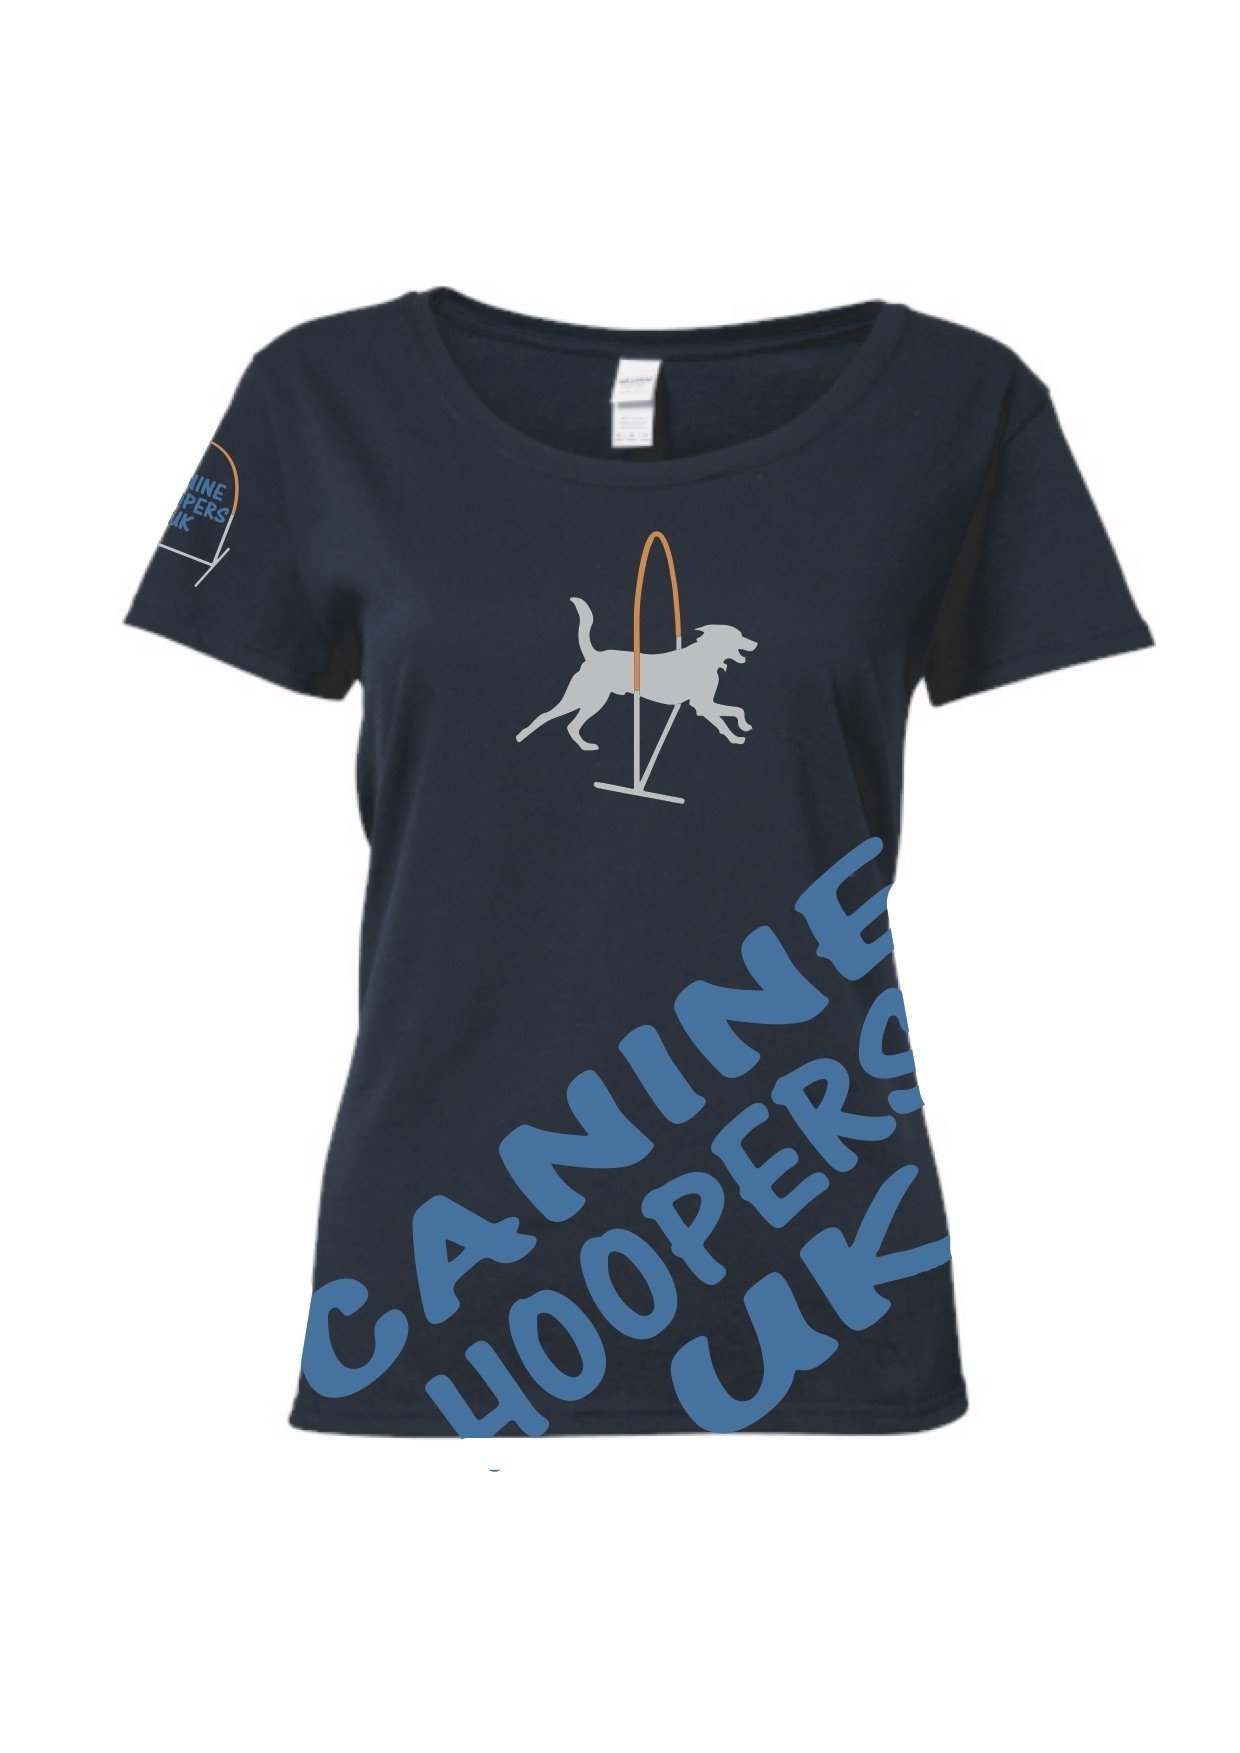 Canine Hoopers UK T shirt XL – Ladies fit – Pooch